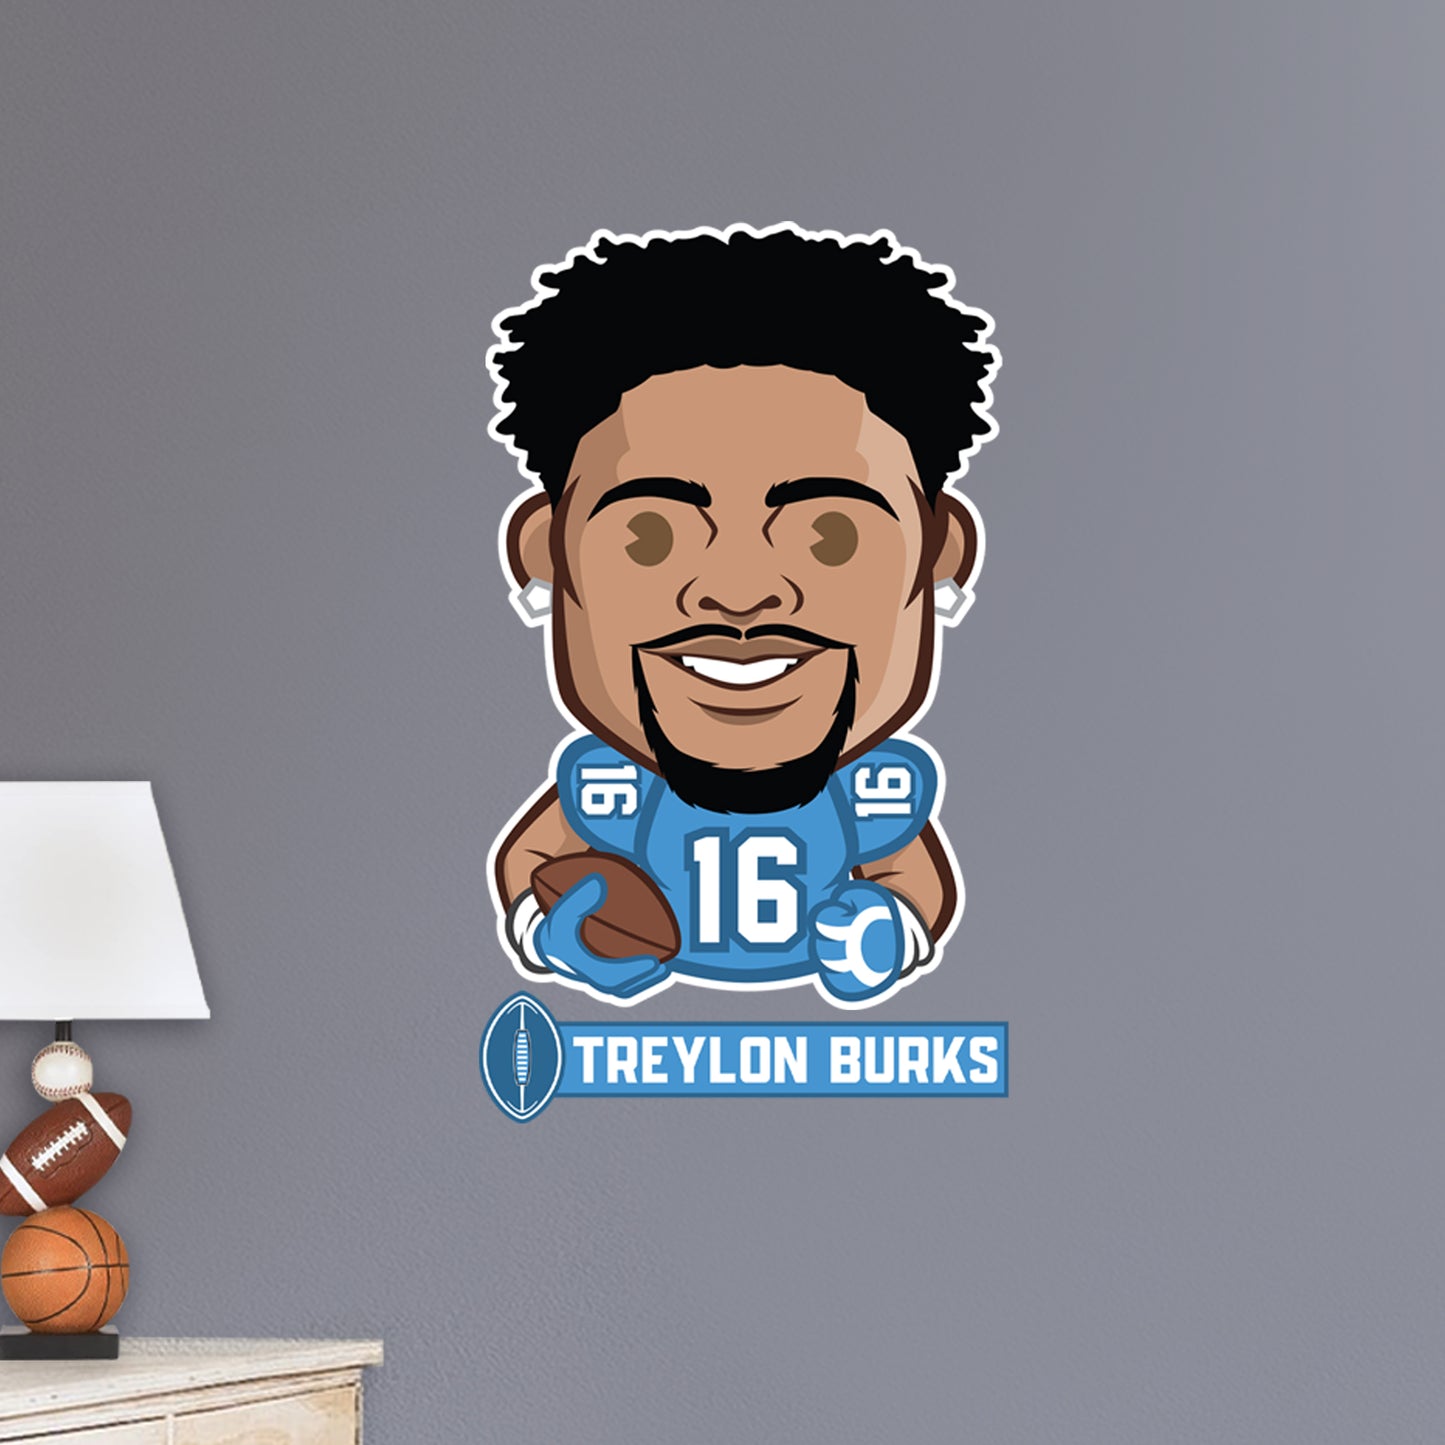 Tennessee Titans: Treylon Burks  Emoji        - Officially Licensed NFLPA Removable     Adhesive Decal